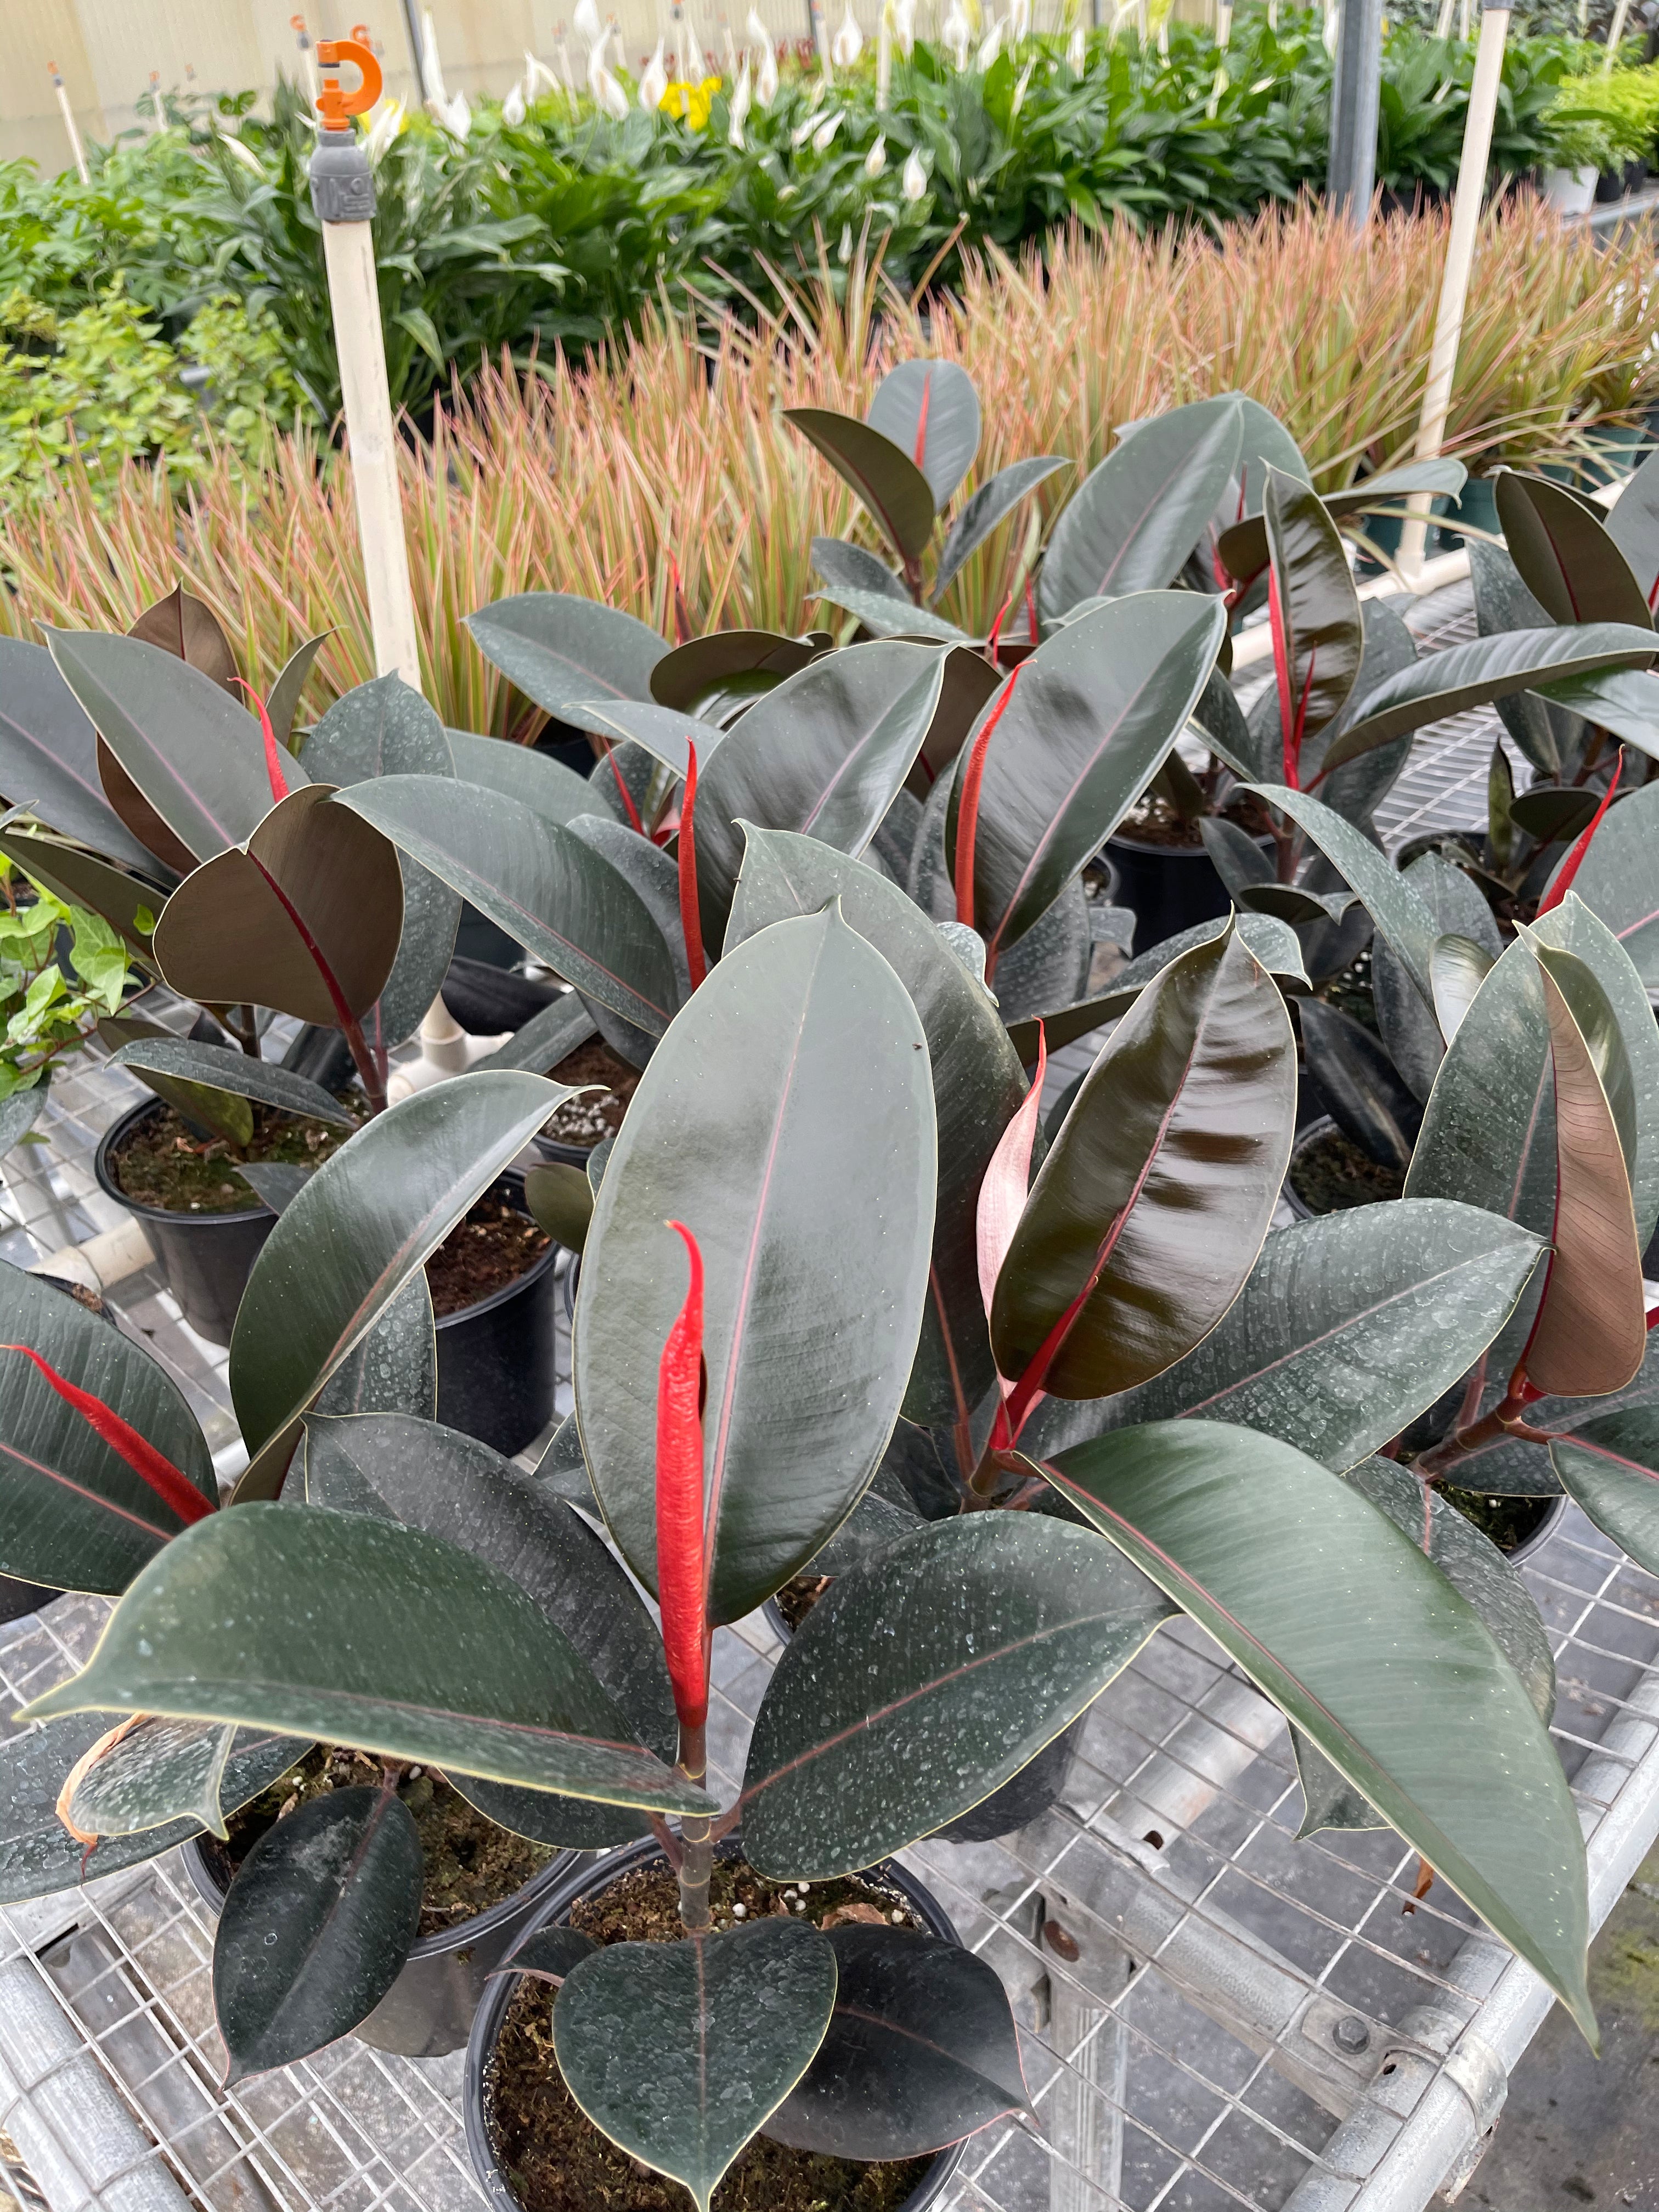 Burgundy rubber trees in the greenhouse.